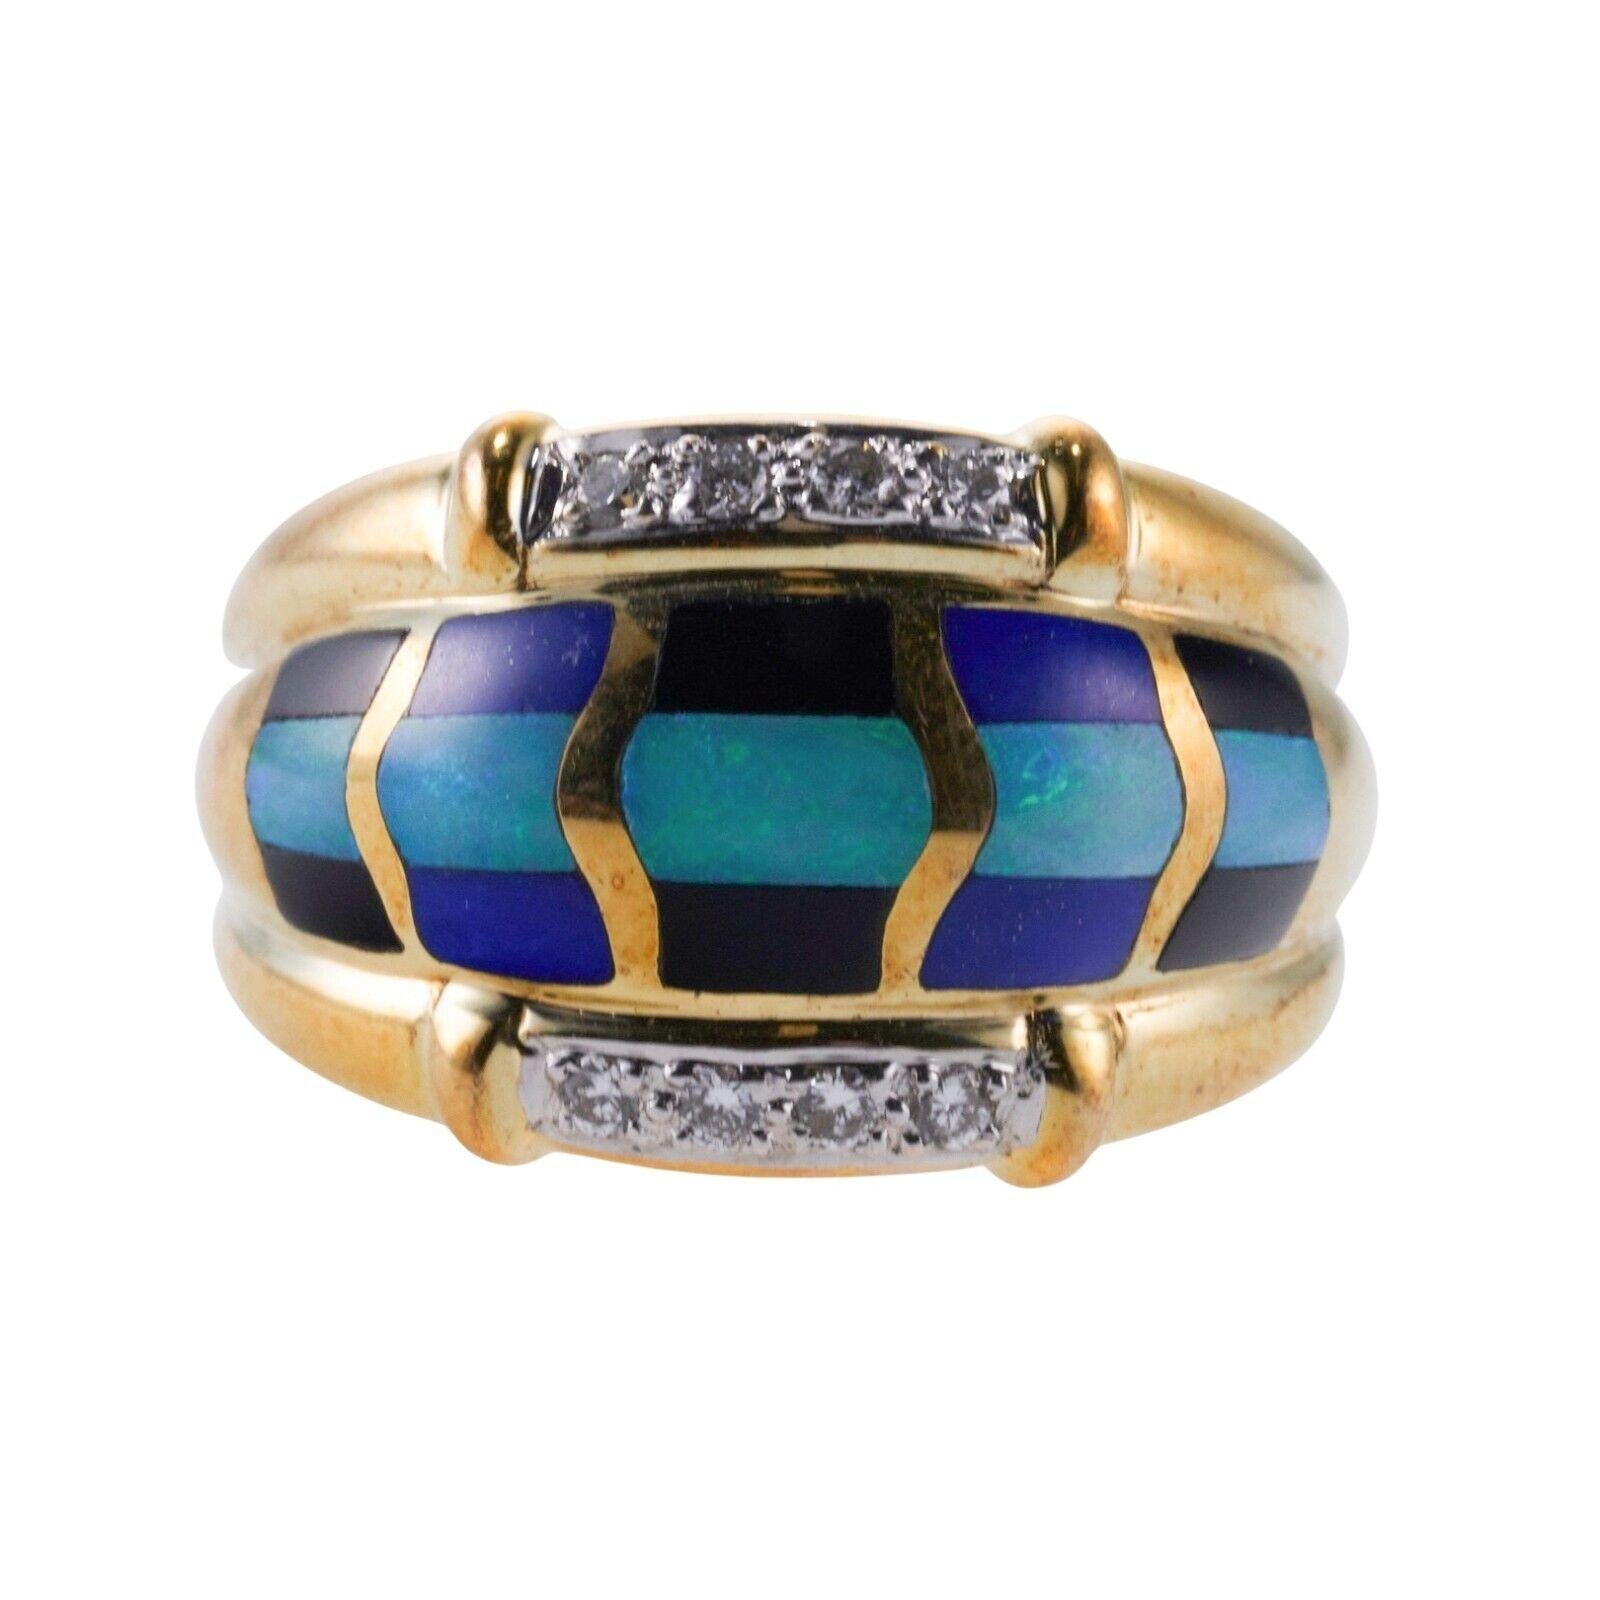 A 14k yellow gold ring set with mother-of-pearl, onyx, lapis, opal, and diamonds - approx. 0.08ctw. Ring Size 8, 15mm wide. 10.8 grams.